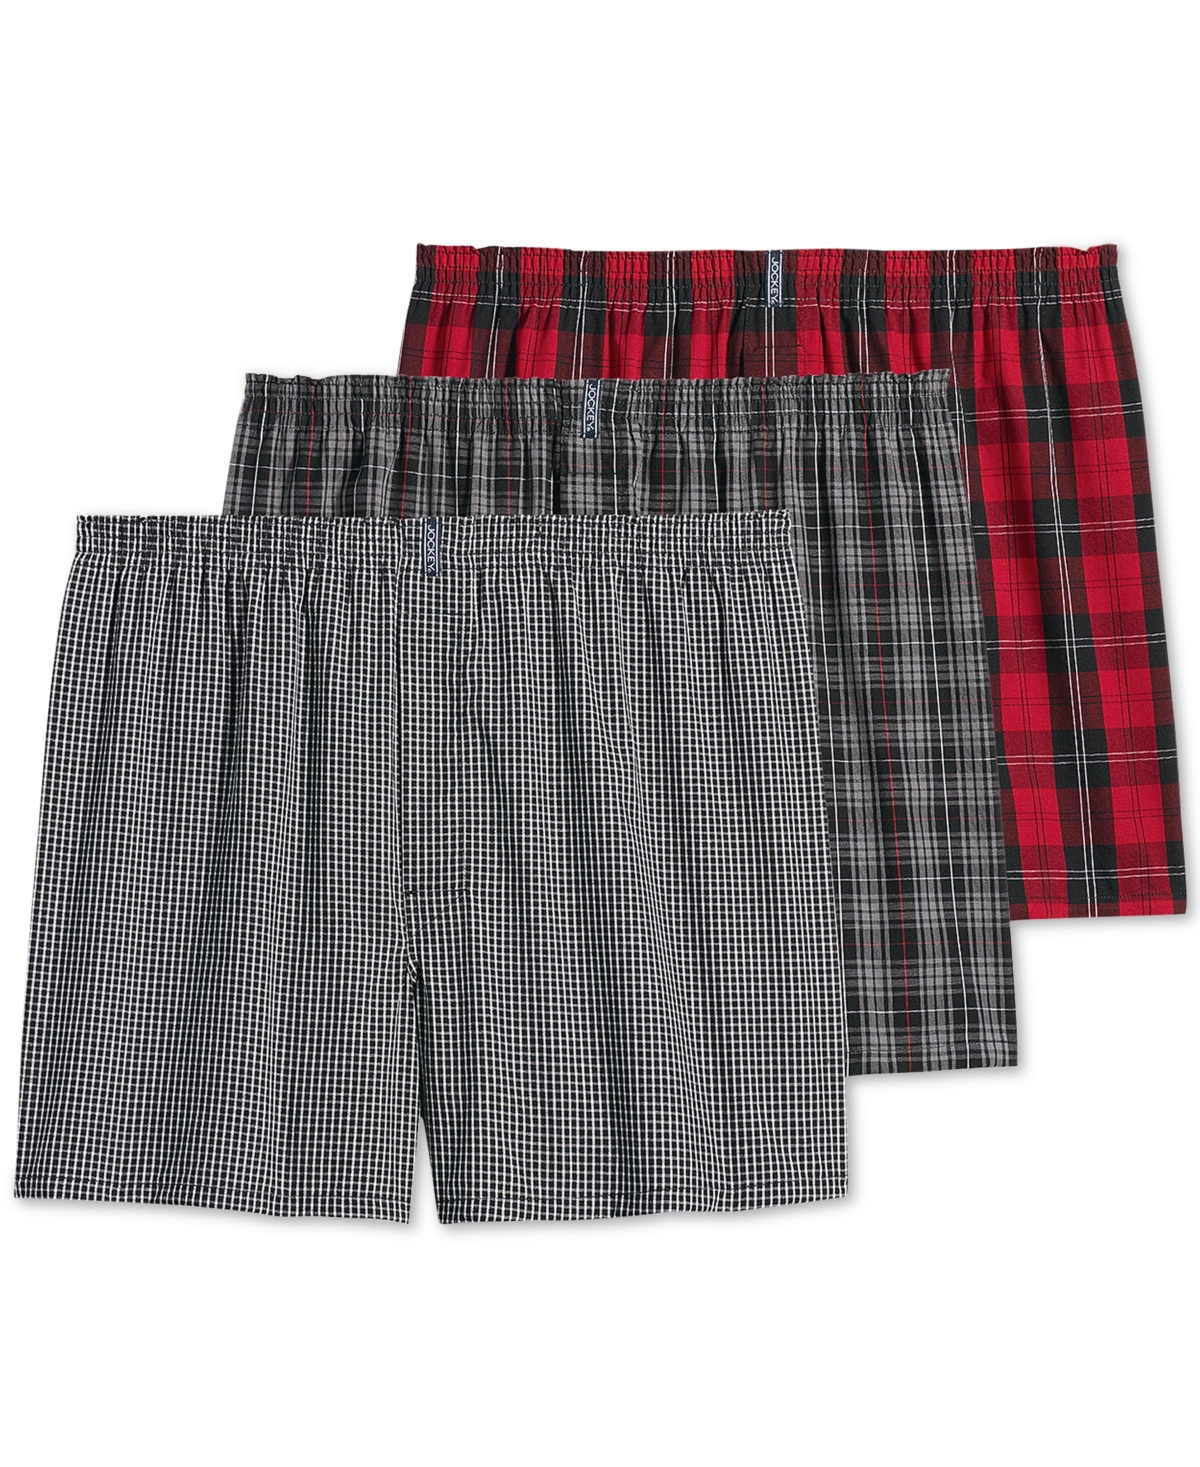 Men's 3-Pk. Woven Boxers - Black and Red Plaid